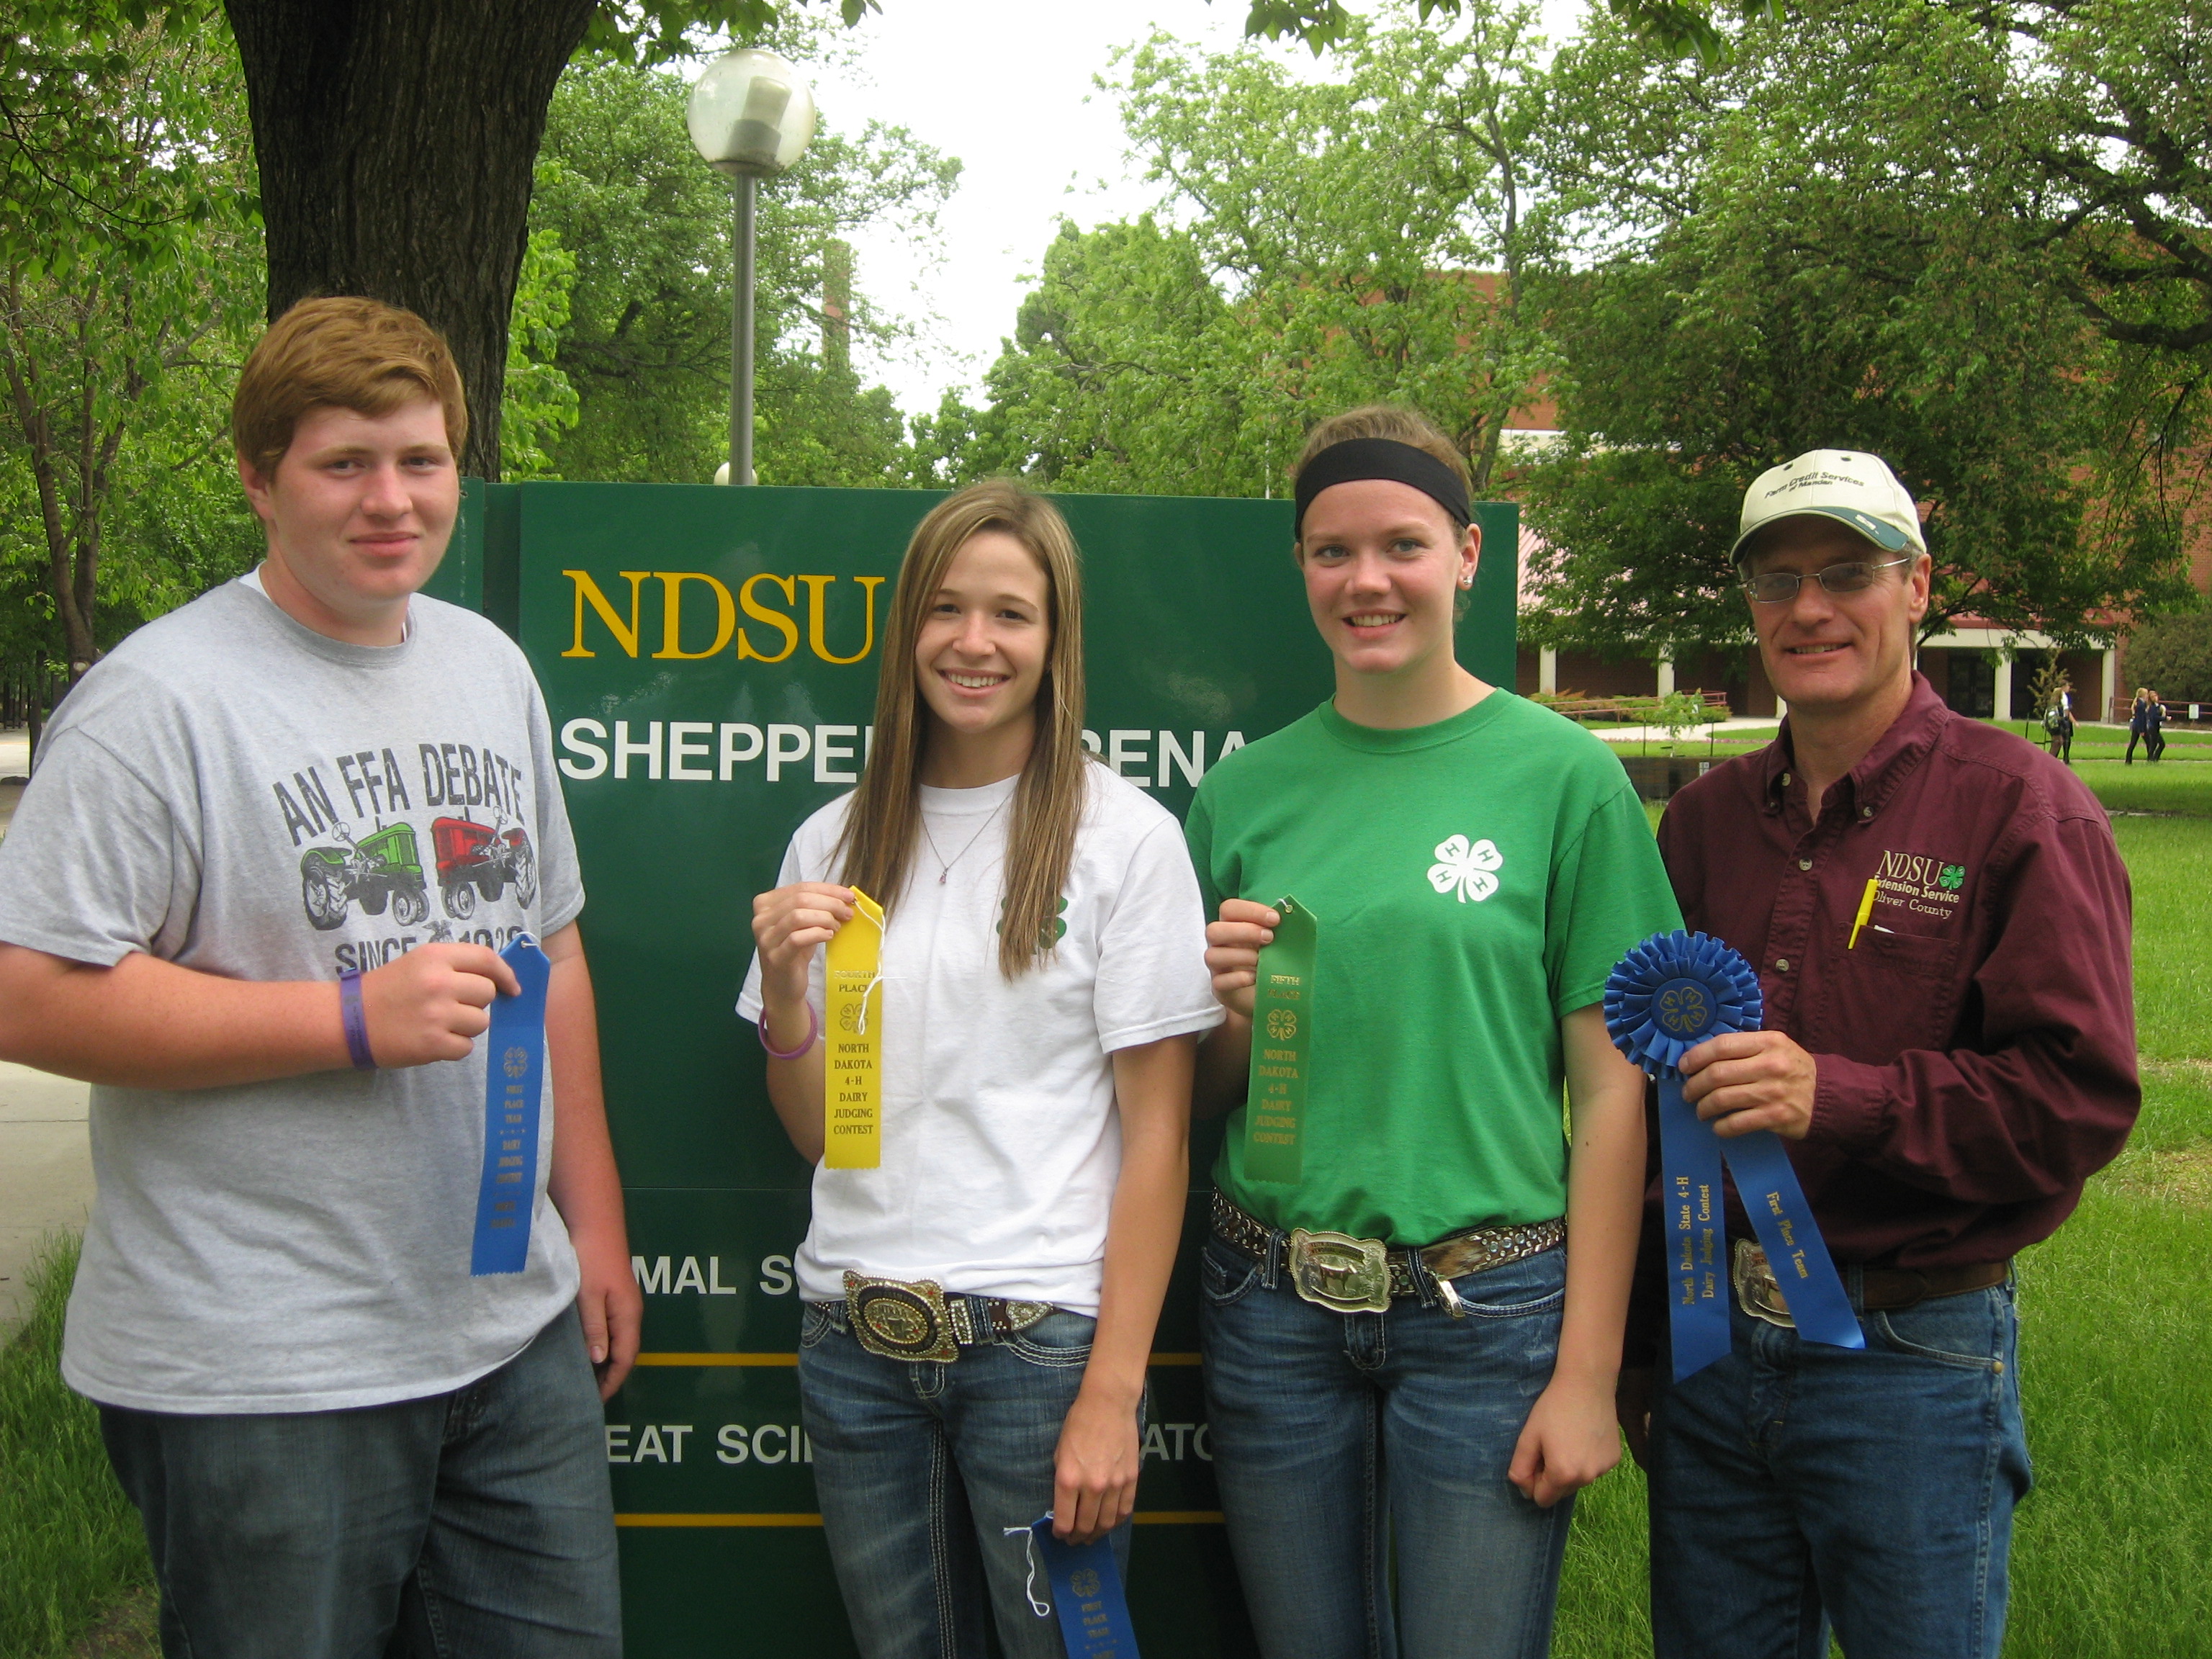 Oliver County team members (from left) Shane Giedd, Rachel Oliver and Emily Klein, and their coach, Extension agent Rick Schmidt, display ribbons the team received in the senior division of the 4-H dairy judging contest at NDSU.